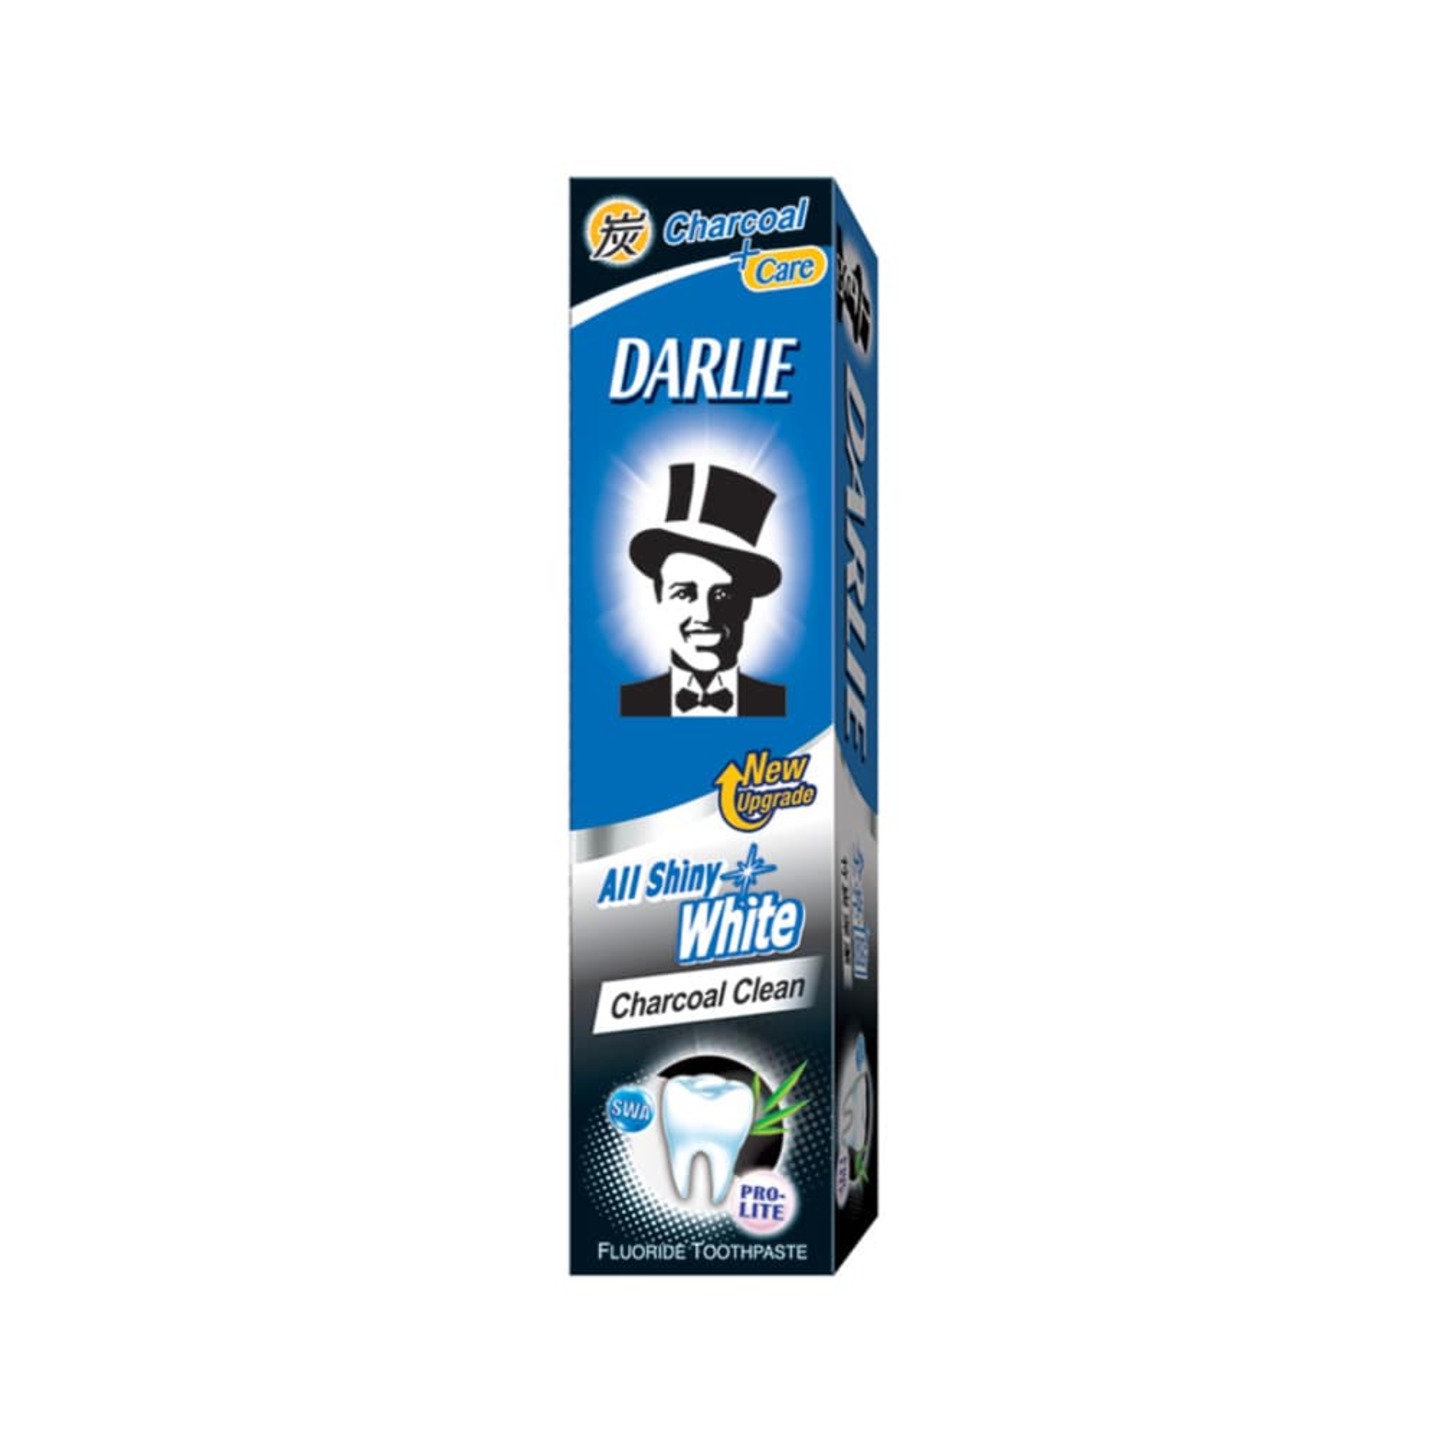 Darlie Toothpaste All Shiny Charcoal